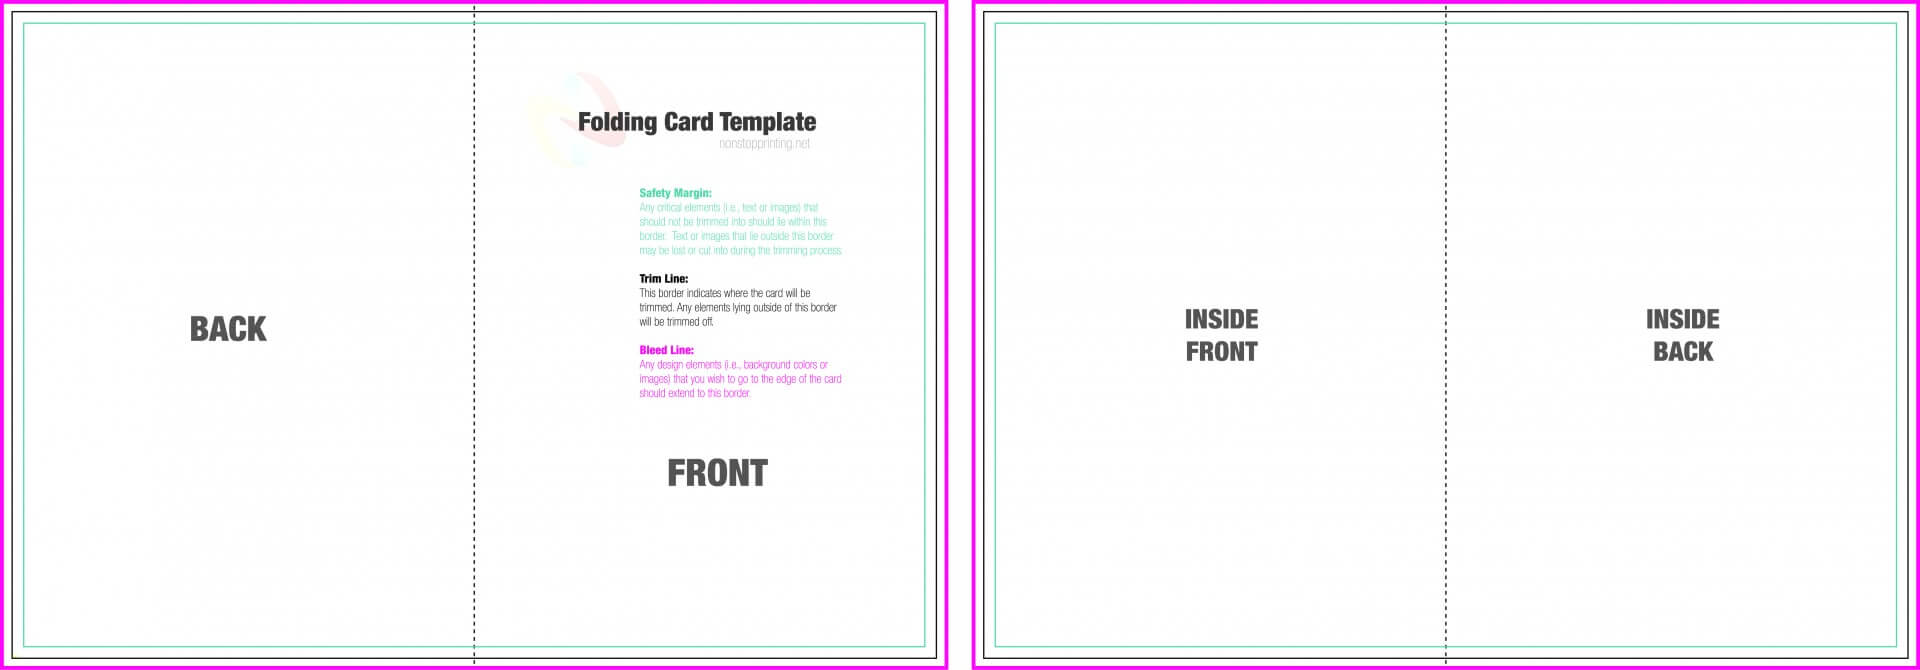 Stupendous Quarter Fold Card Template Photoshop Ideas Pertaining To Foldable Card Template Word